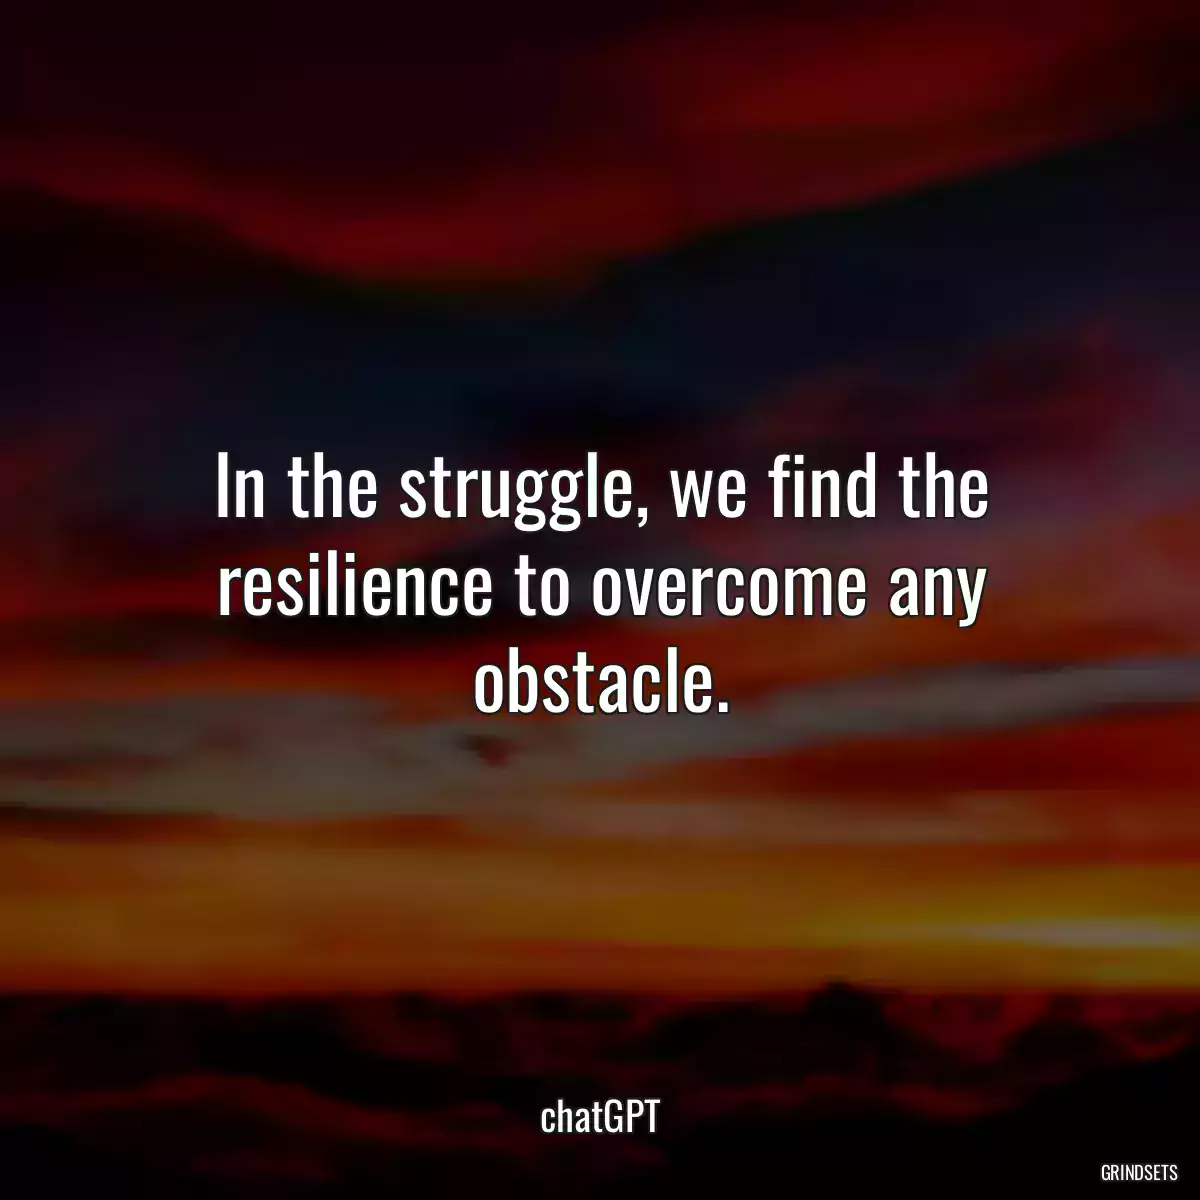 In the struggle, we find the resilience to overcome any obstacle.